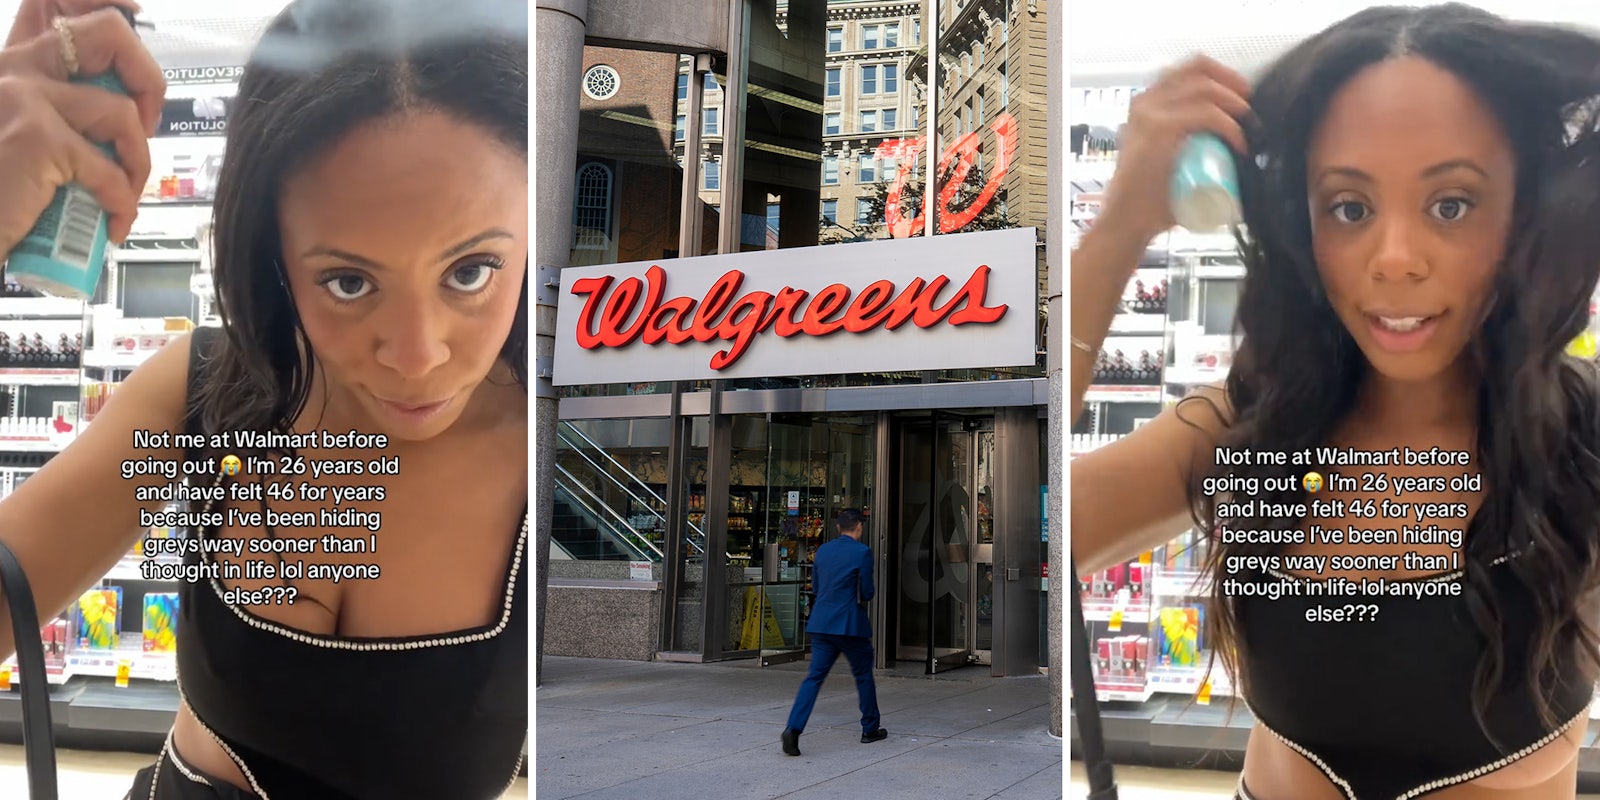 Woman goes to Walgreen’s beauty aisle to get ready for the night